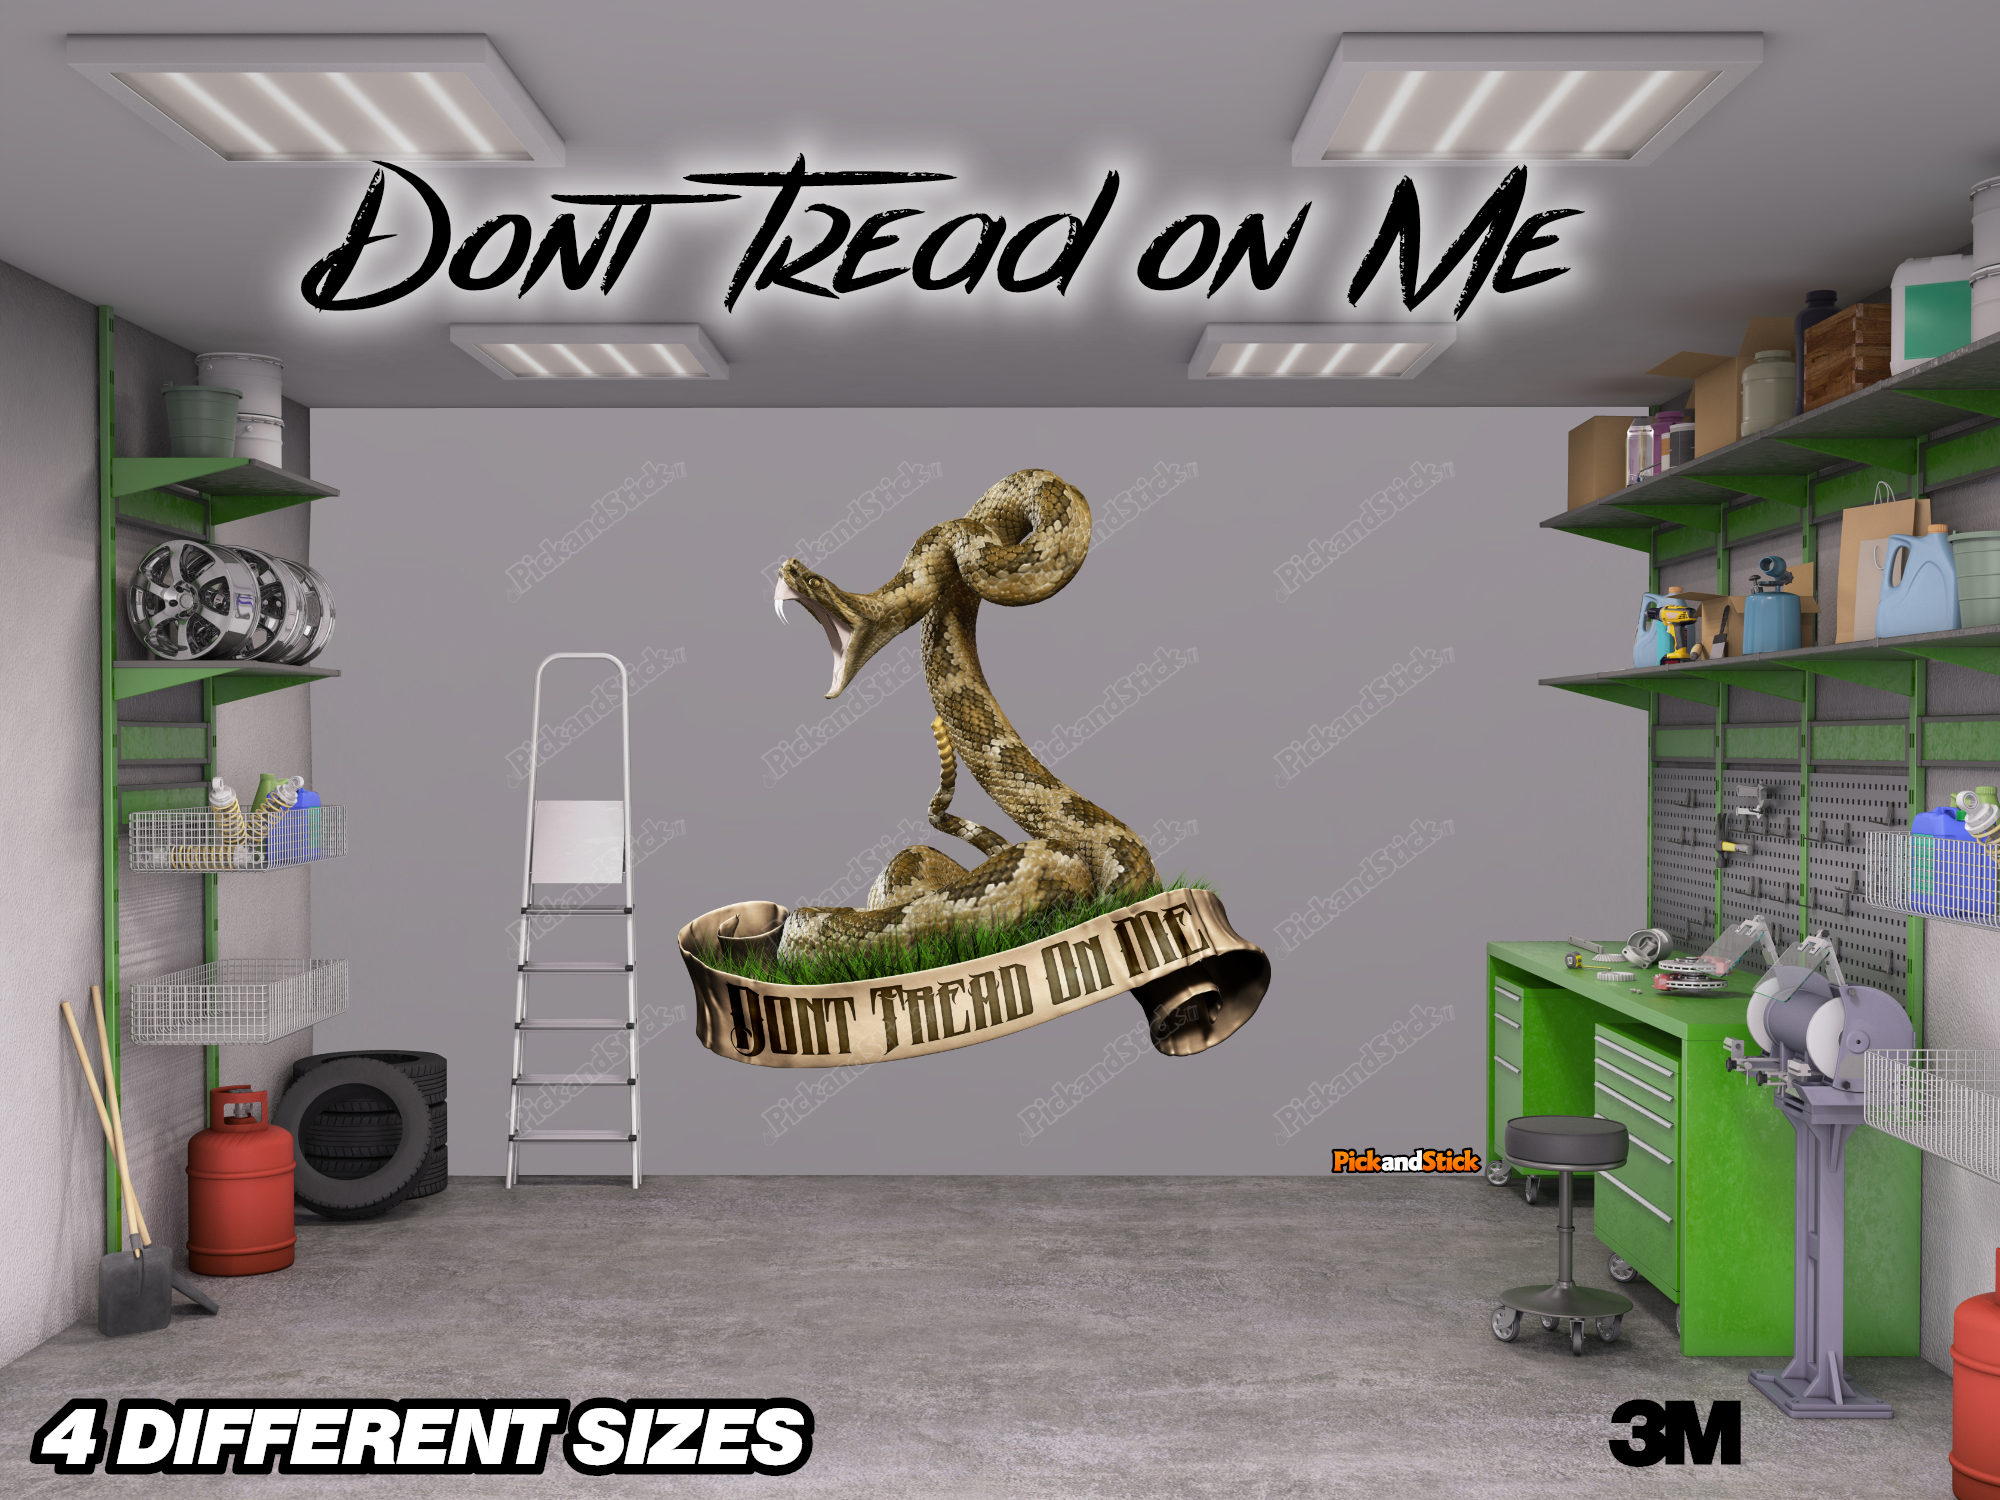 Don't Tread On Me Wall Graphic - PickandStickcom